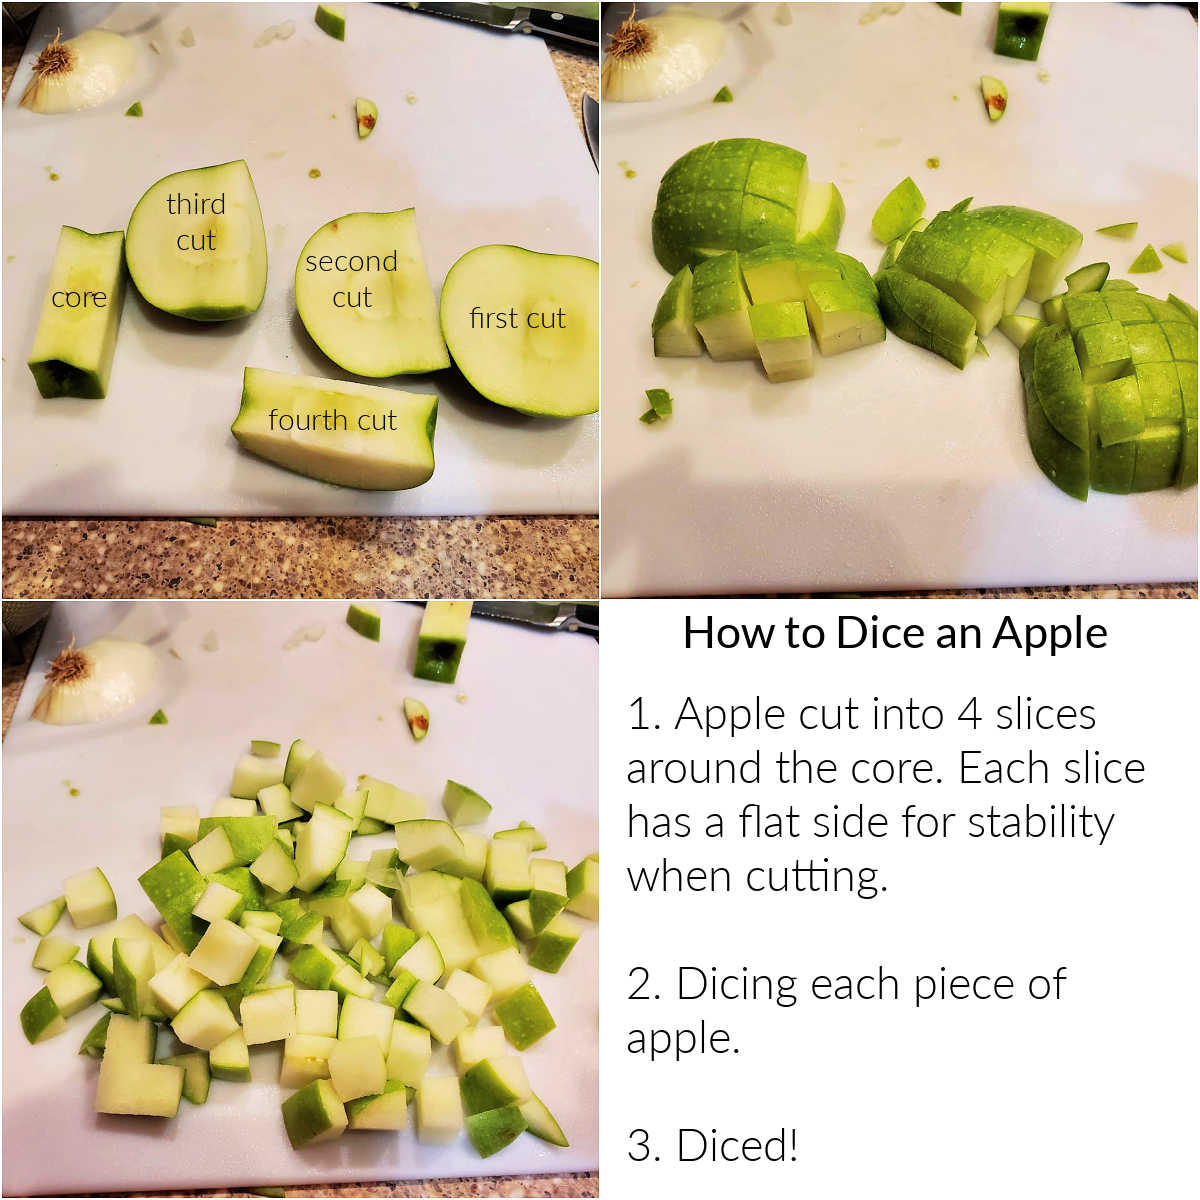 A collage of 3 images showing how to cut a green apple to dice it.